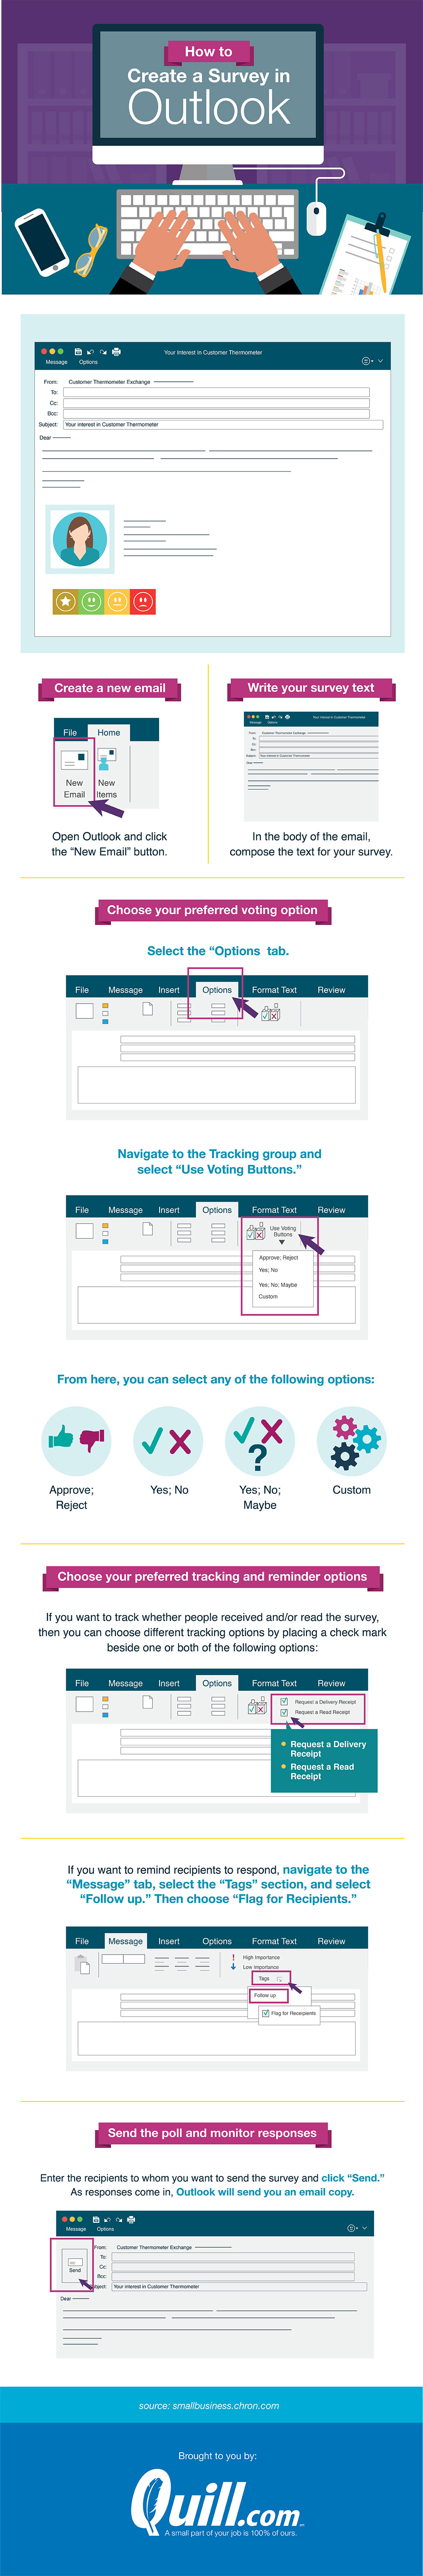 How to Create Online Surveys with Outlook  - Infographic